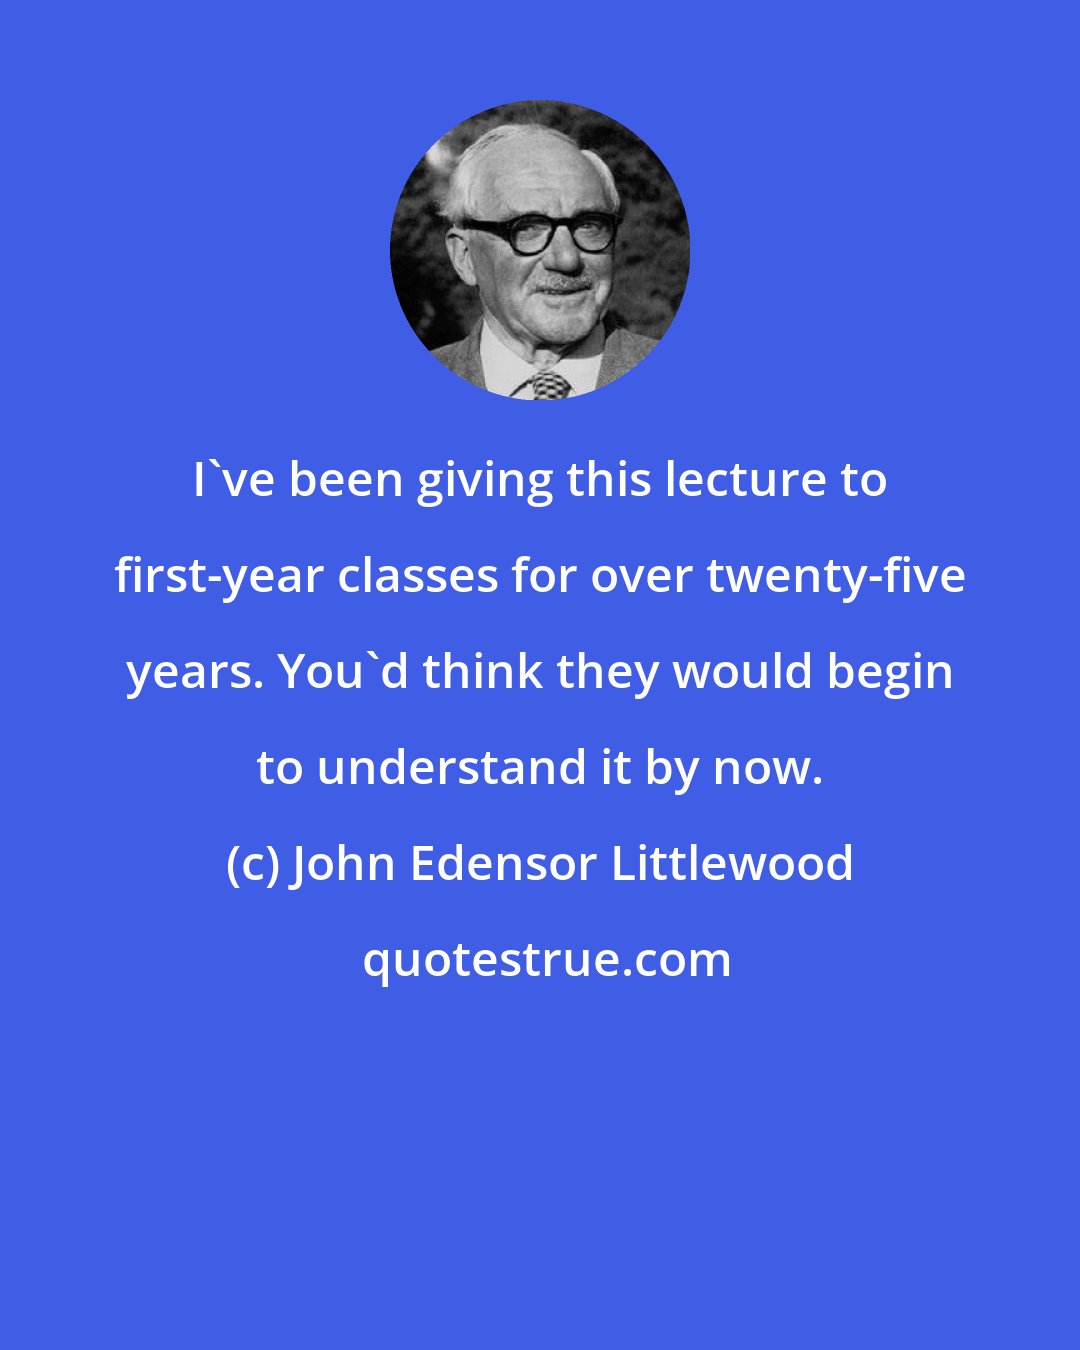 John Edensor Littlewood: I've been giving this lecture to first-year classes for over twenty-five years. You'd think they would begin to understand it by now.